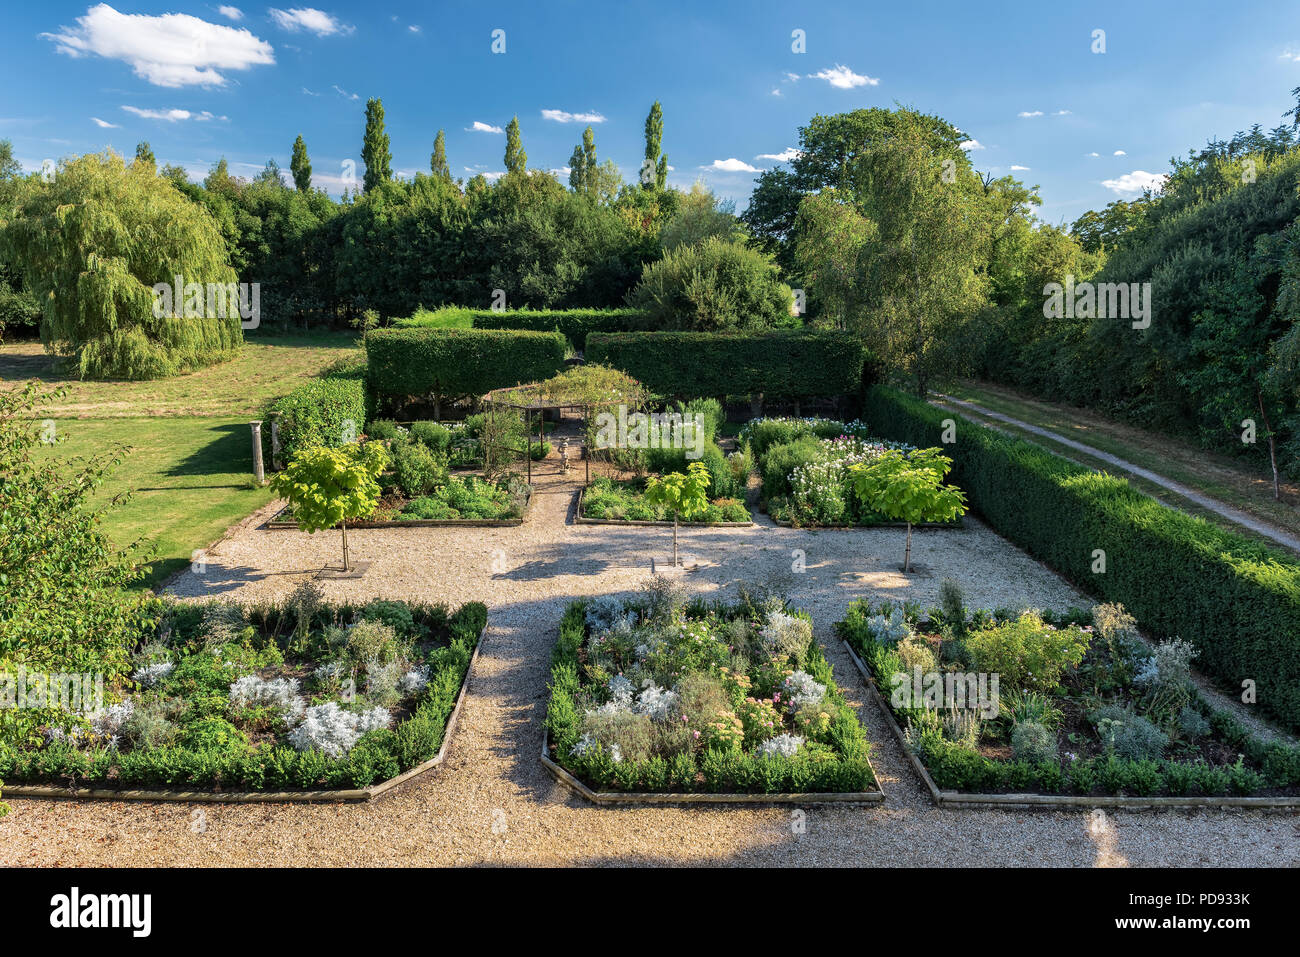 Box-bordered herbaceous beds in english country garden Stock Photo